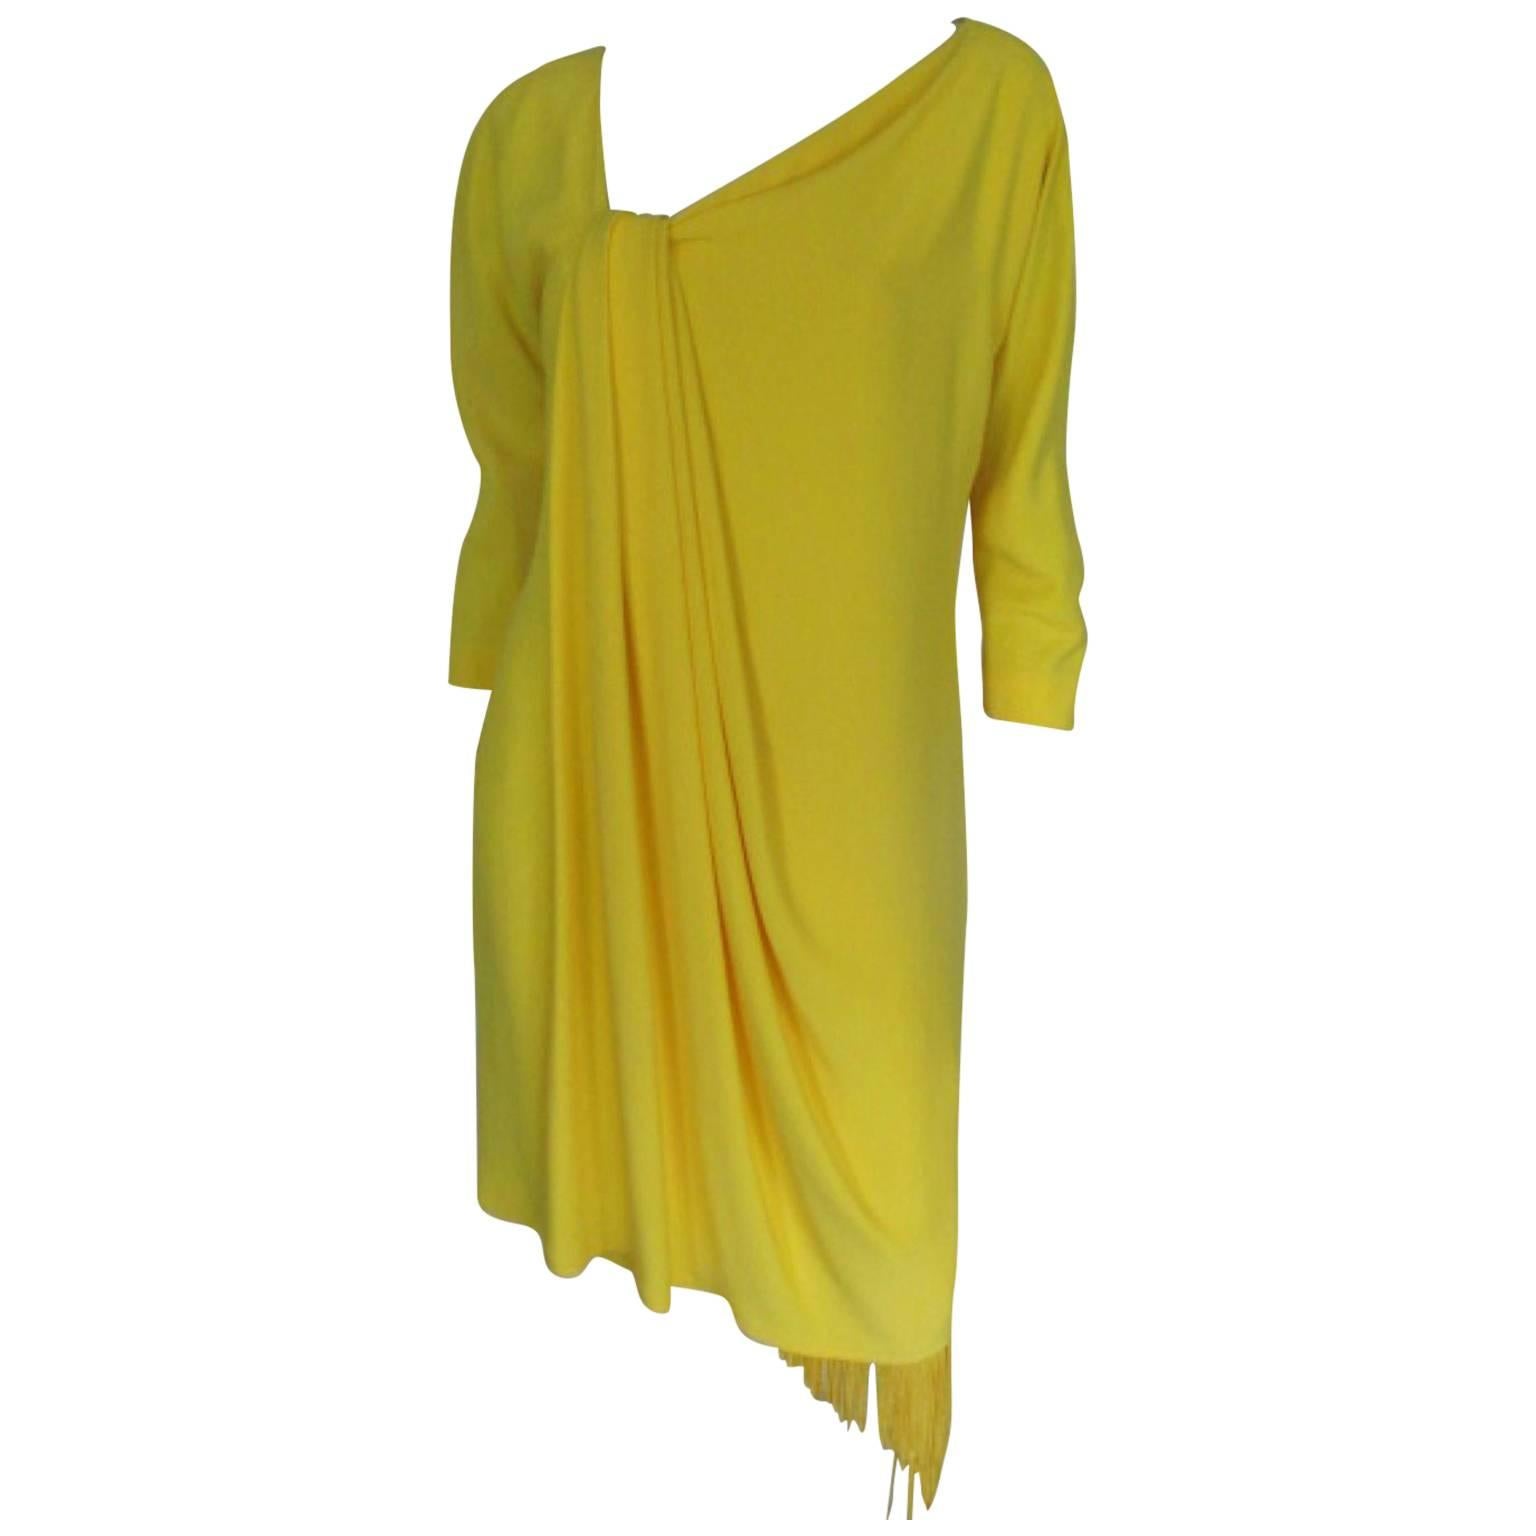 Gianfranco Ferre fringed yellow dress For Sale